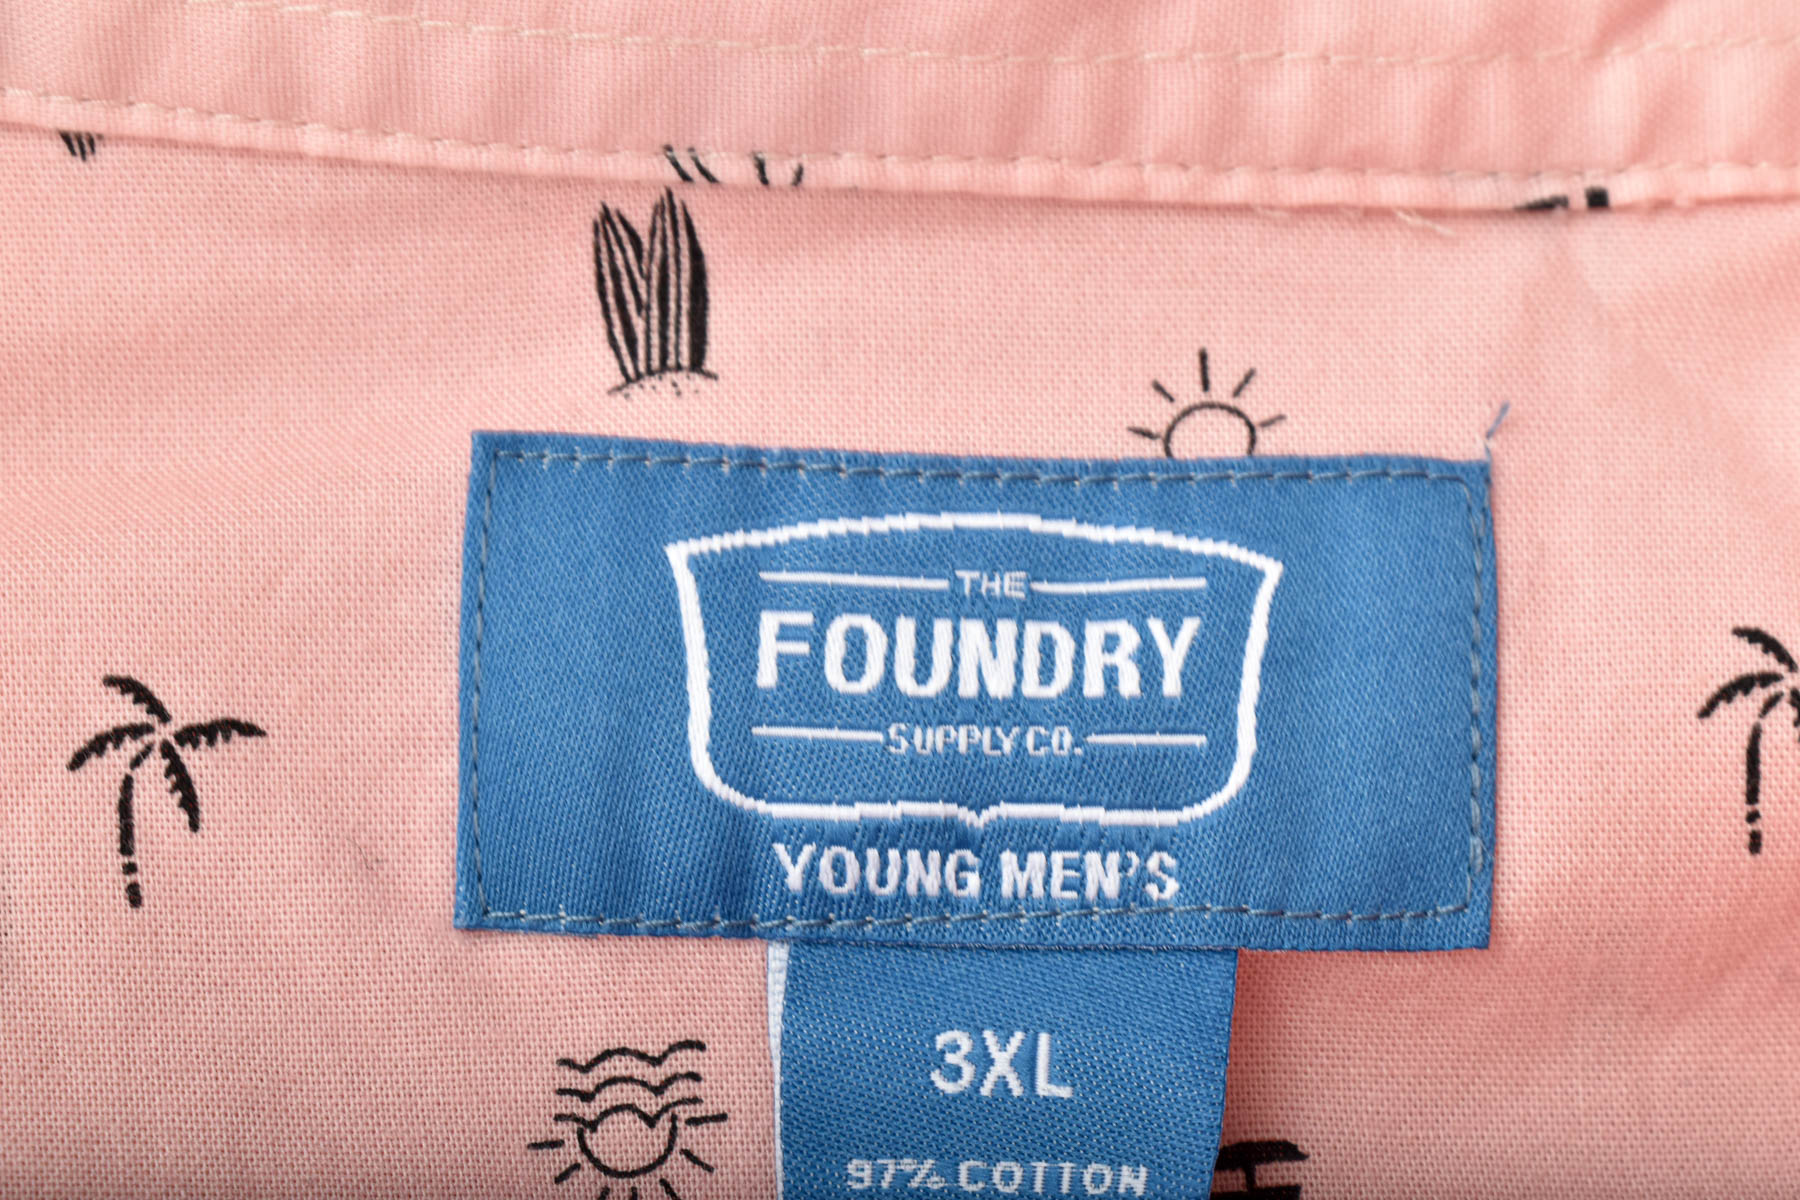 Men's shirt - The FOUNDRY SUPPLY CO. - 2